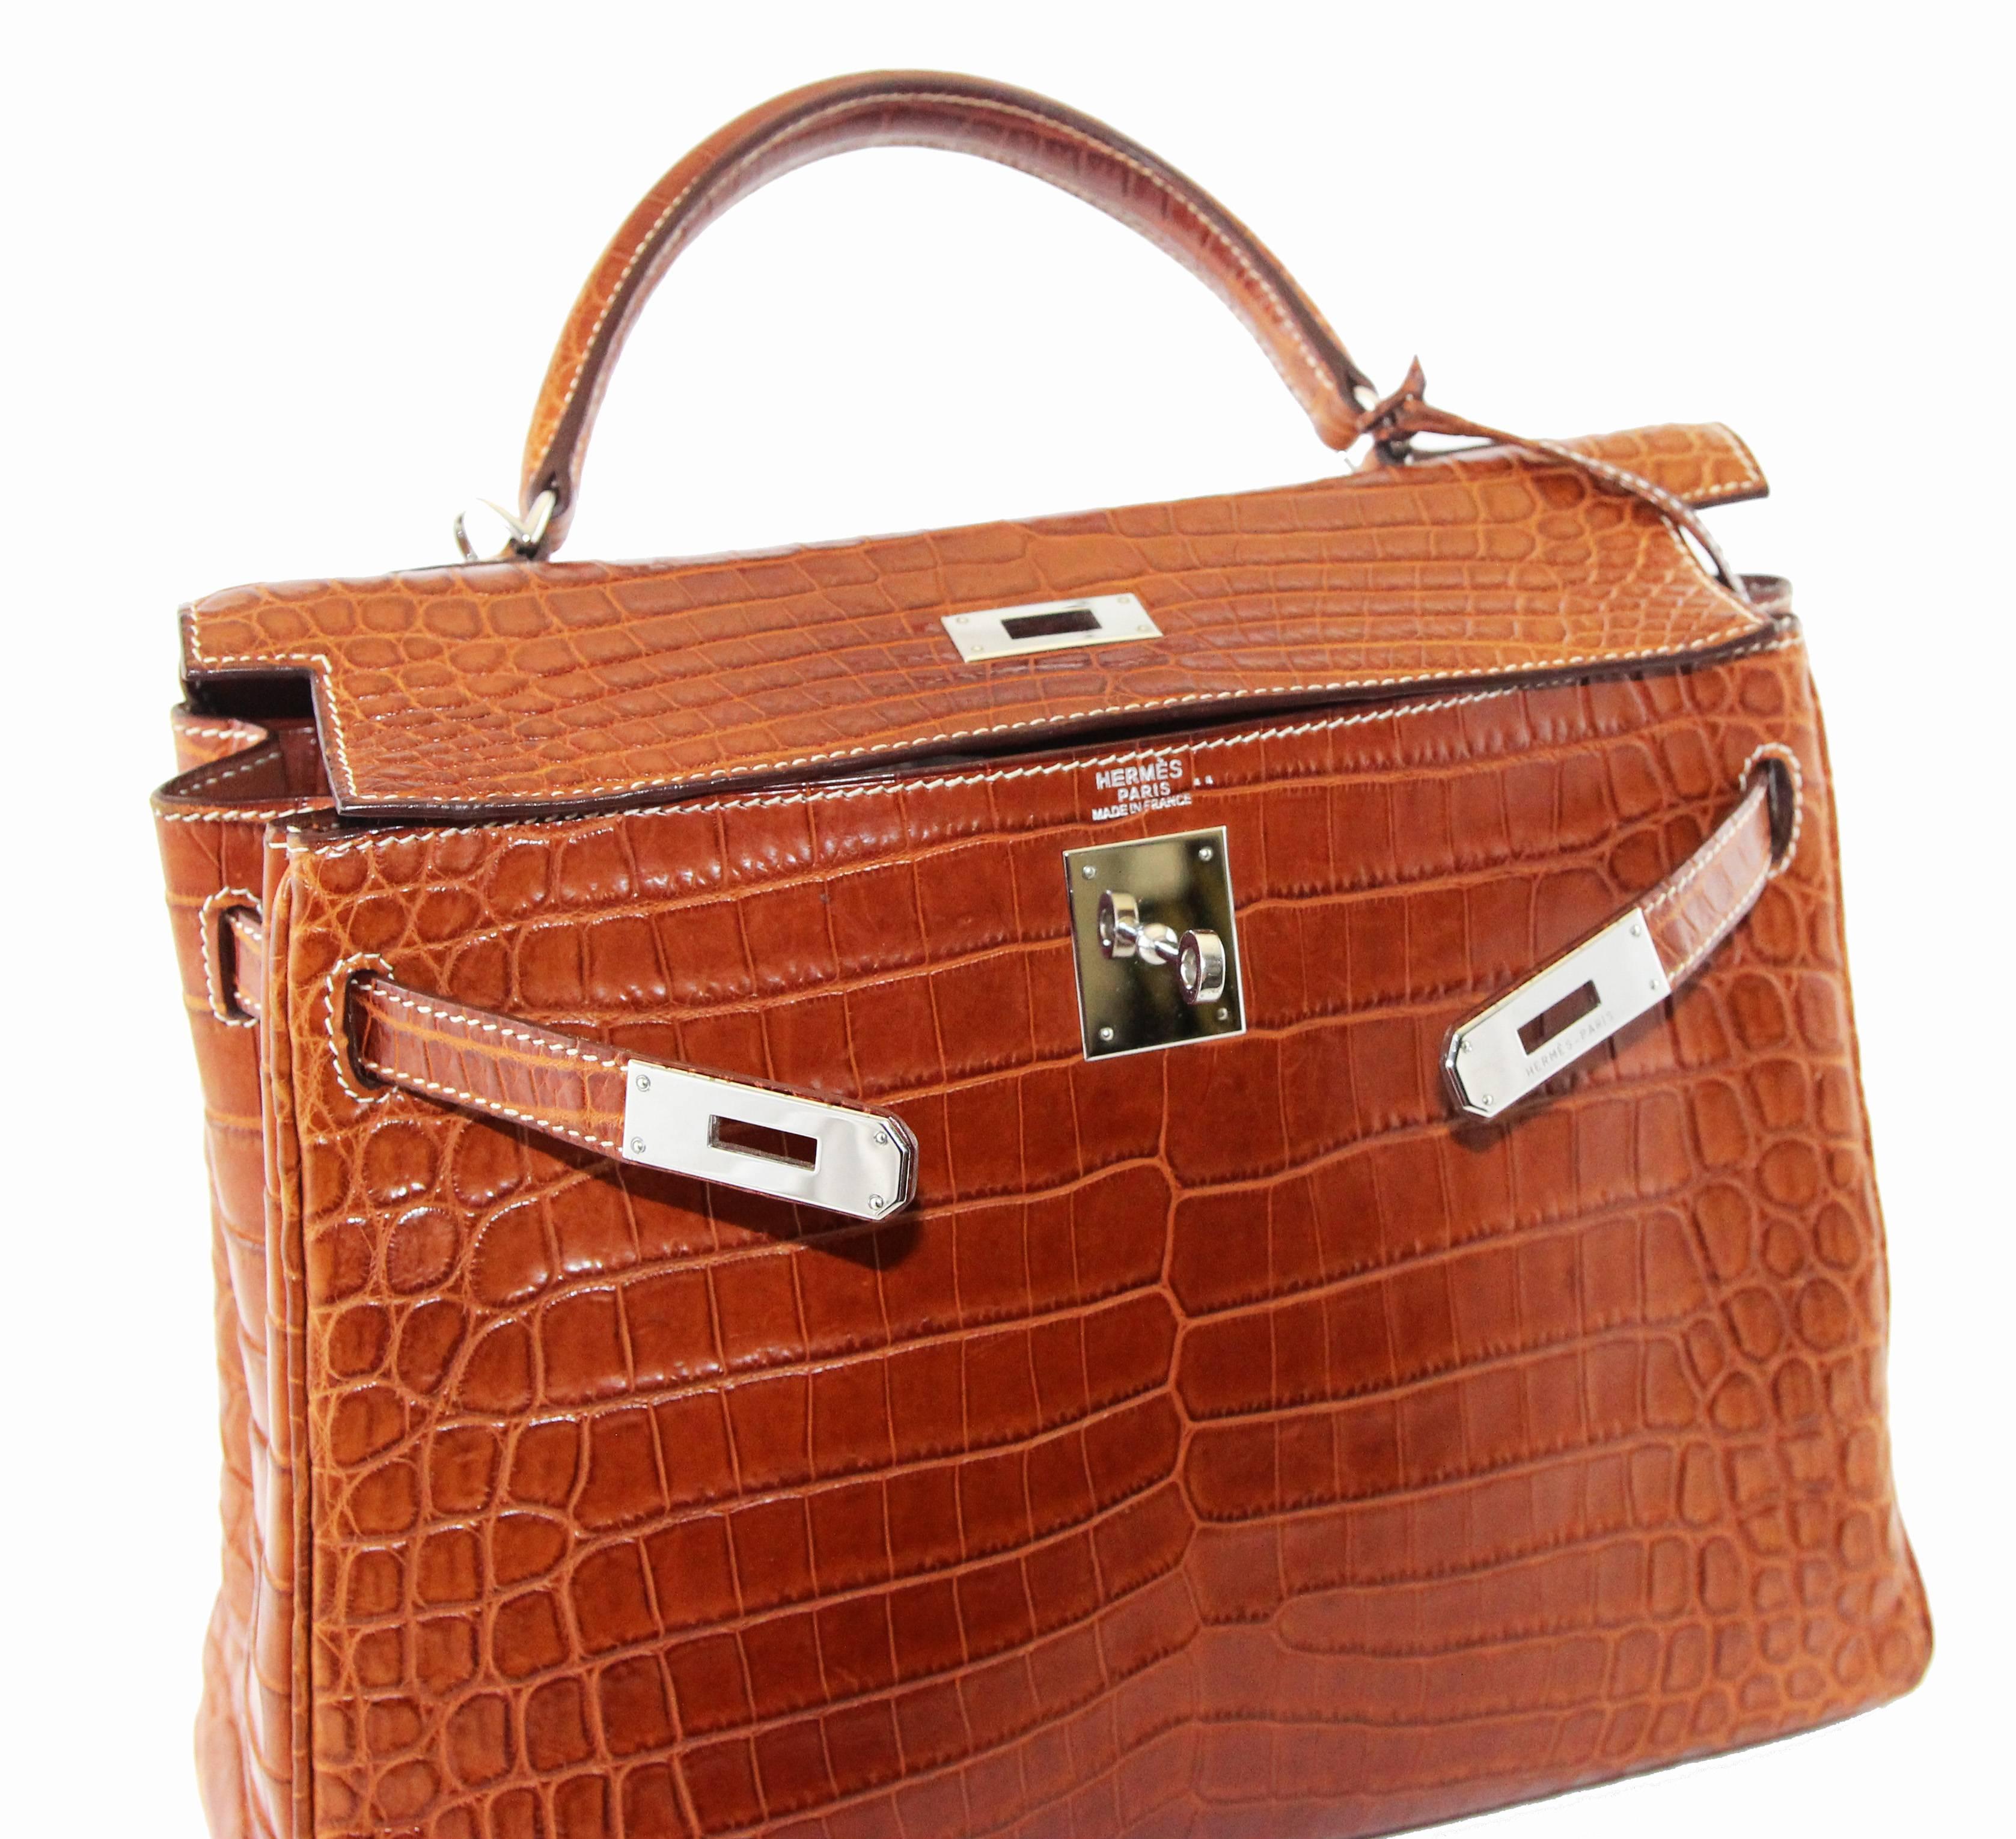 Incredible barenia color for this Hermes Kelly handbag in crocodile niloticus leather, silver Hardware. Shoulder strap. Delivered with certificate and original box
Marked: Hermès Paris Made in France. Stamp J in a square, Year 2006
Size: 32 cm